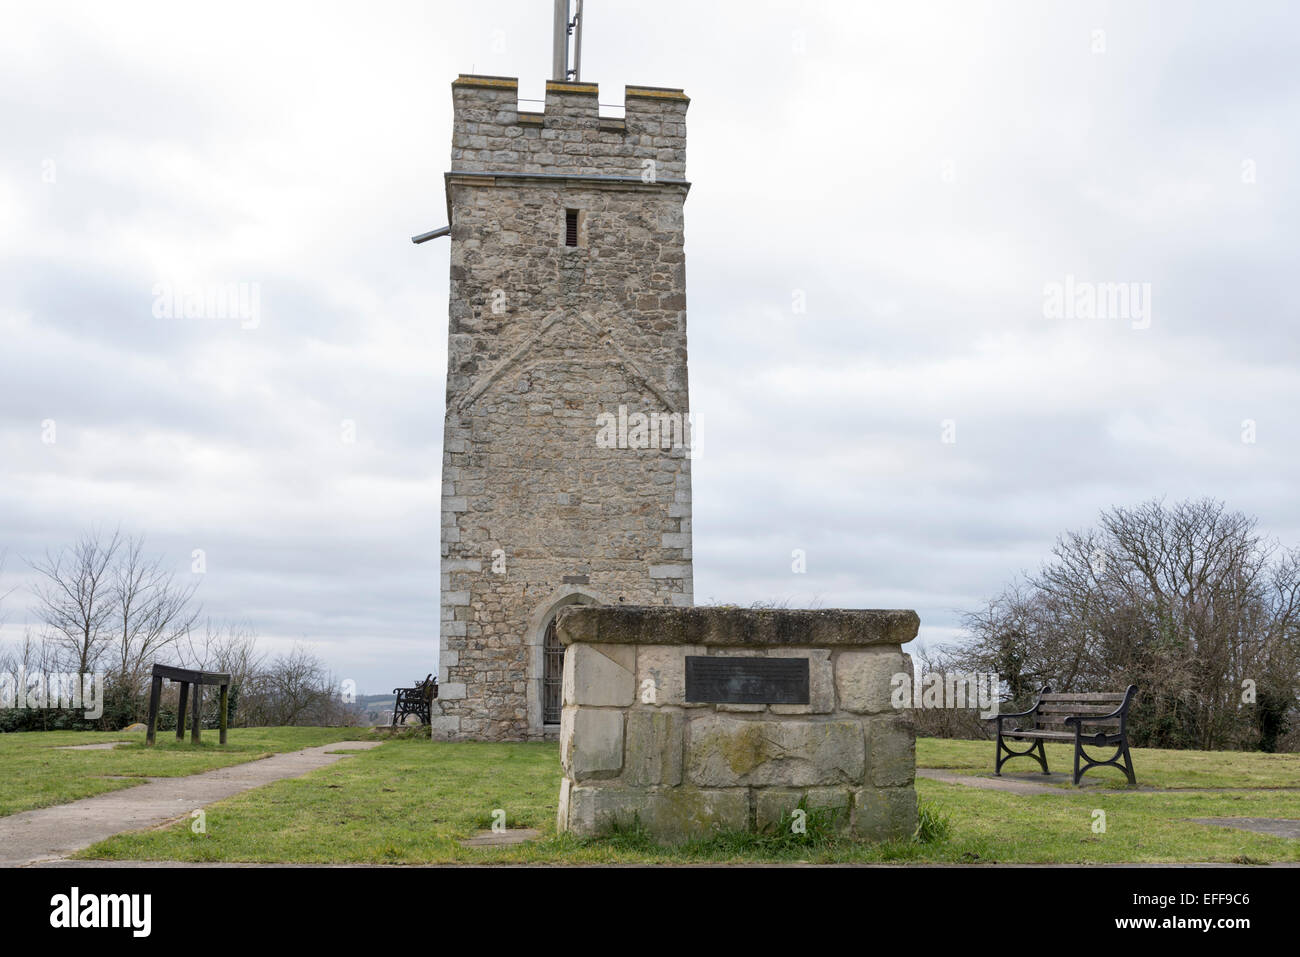 All that remains of Saint Michael's Church, Pitsea, Essex is the tower with a telephone mast coming from it. Stock Photo